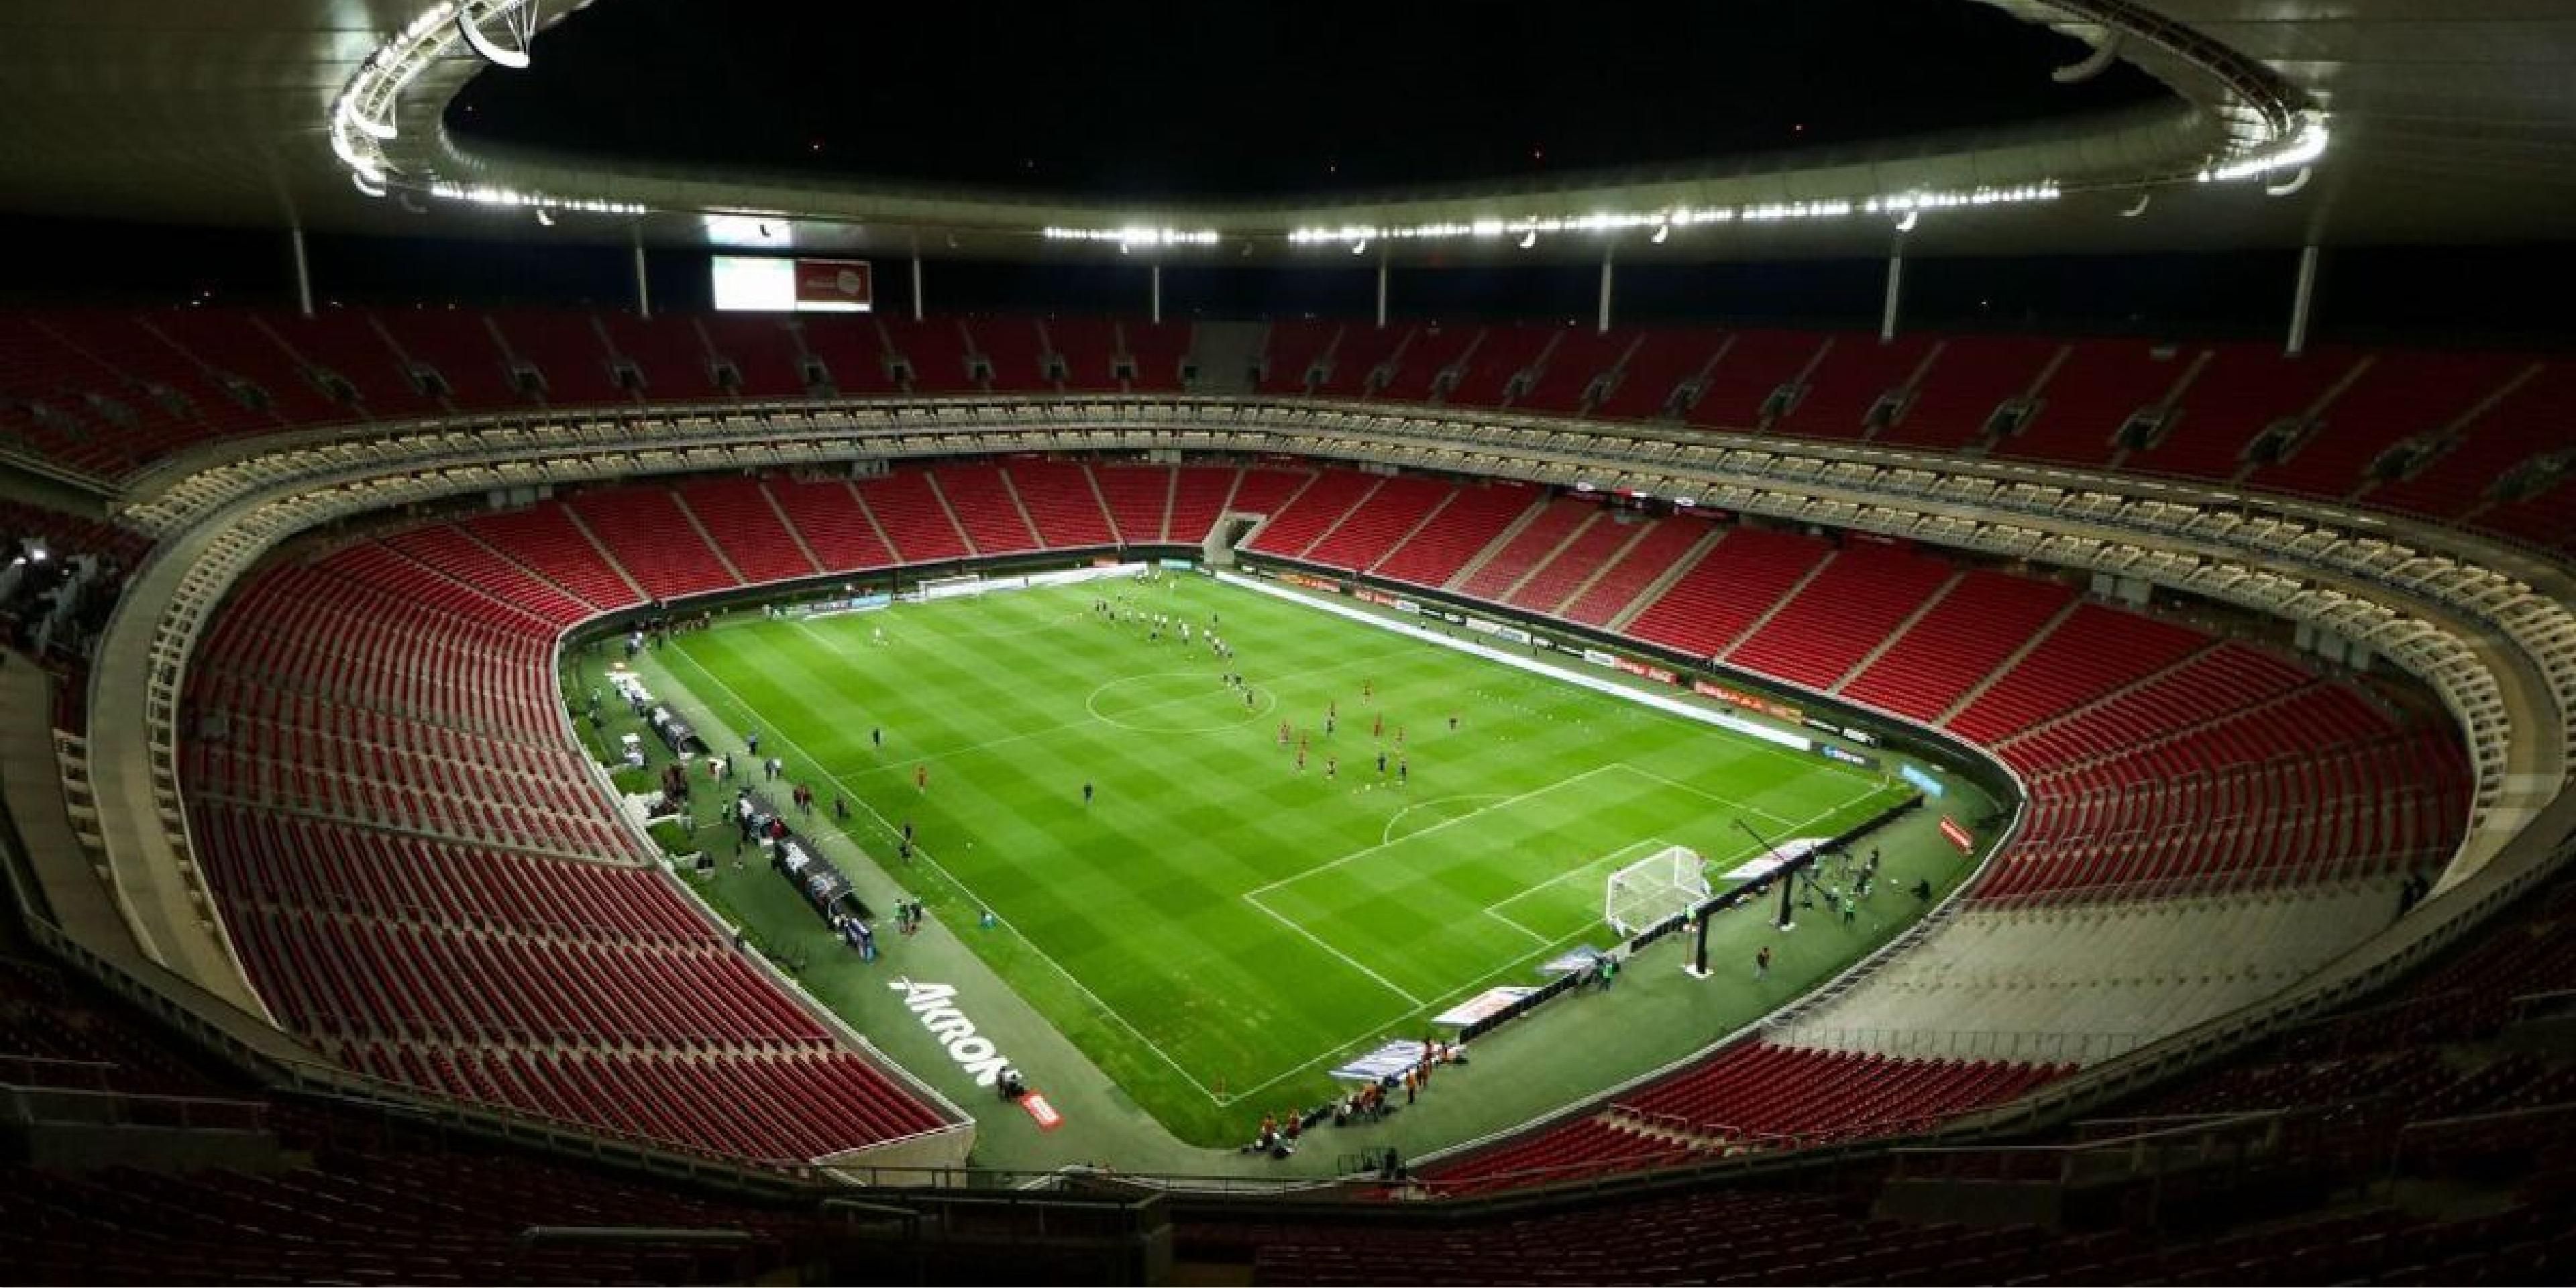 The Chivas Stadium, known for sponsorship reasons as the Akron Stadium, is a sports venue owned by Club Deportivo Guadalajara. This sports venue hosts soccer matches and shows of international stature. It is located just 3 minutes from our facilities. This stadium will host the FIFA World Cup in 2026.